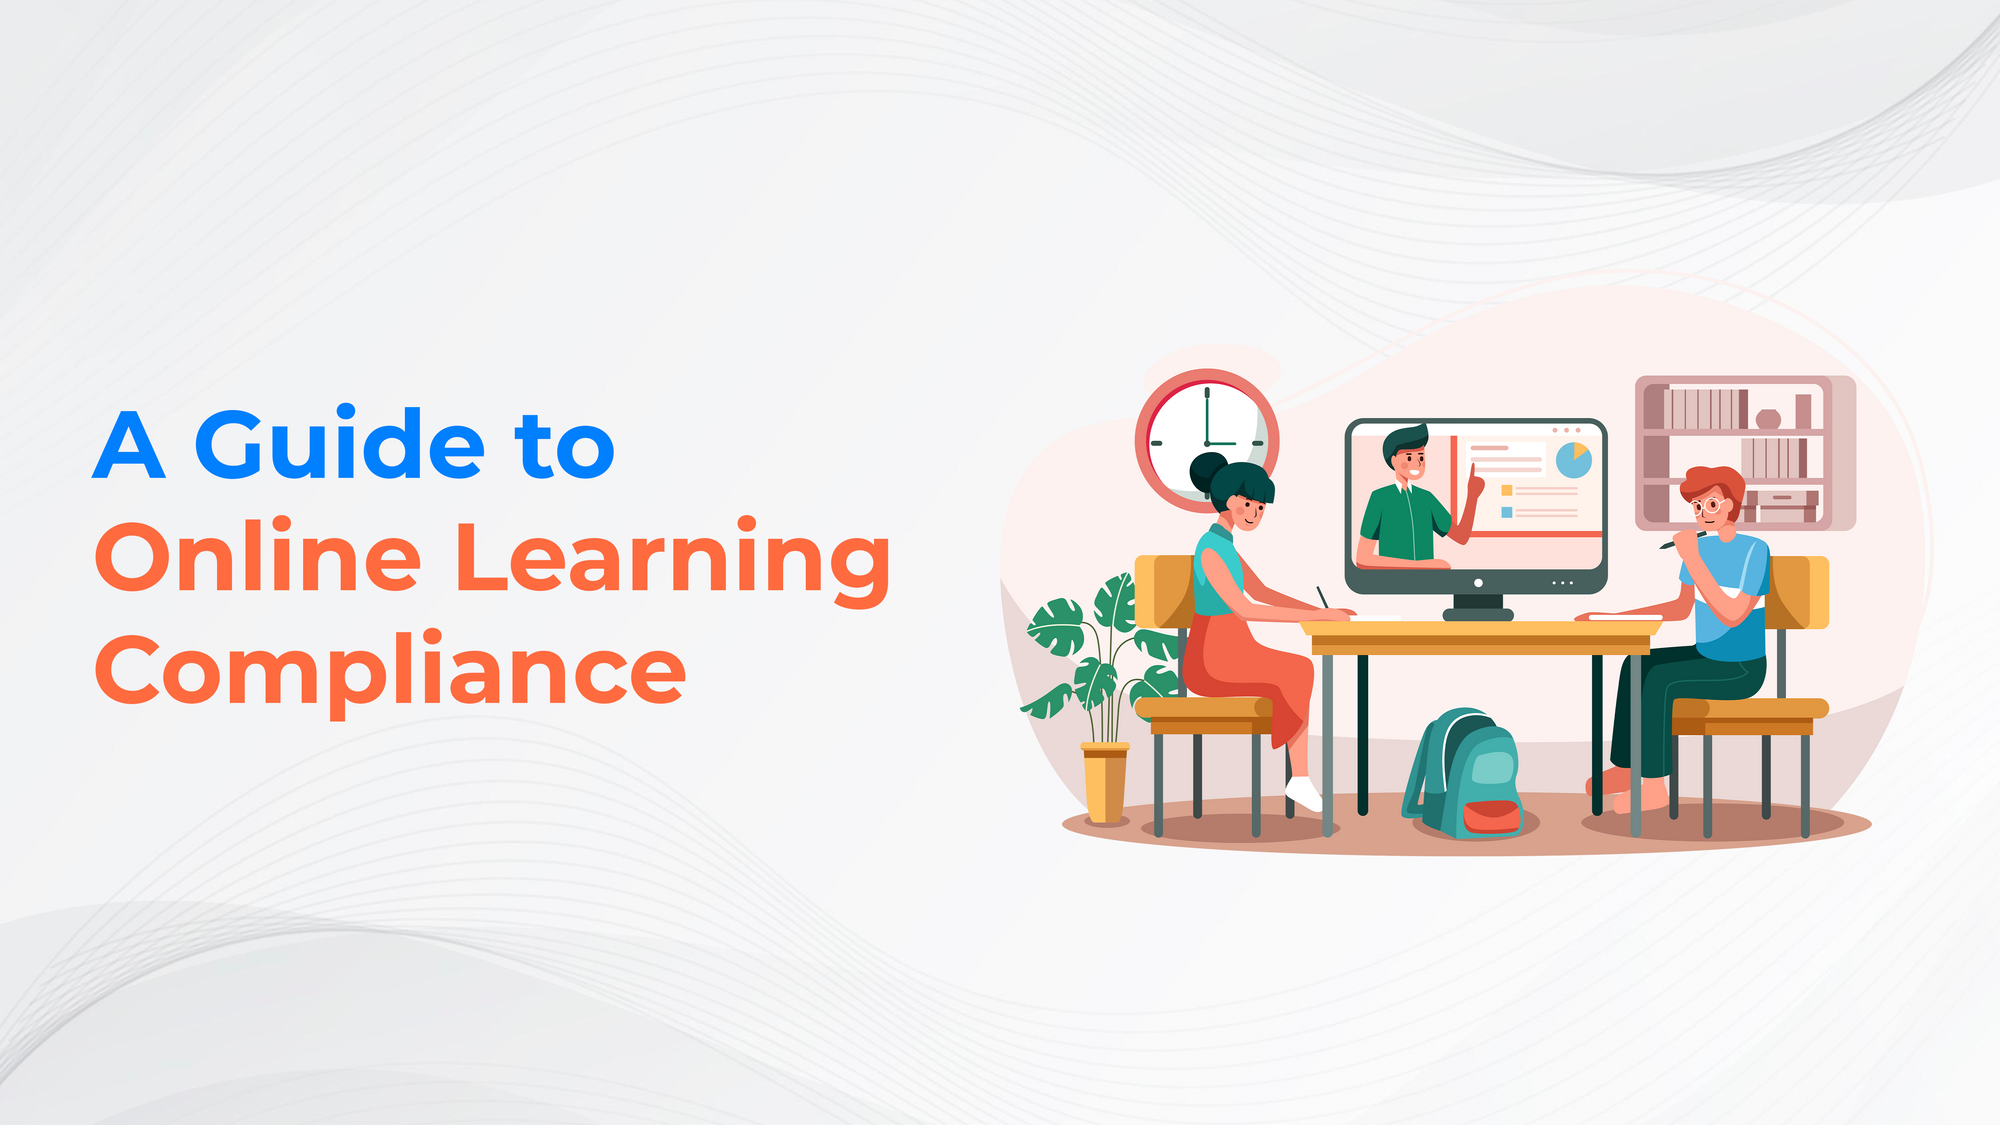 A Guide to Online Learning Compliance